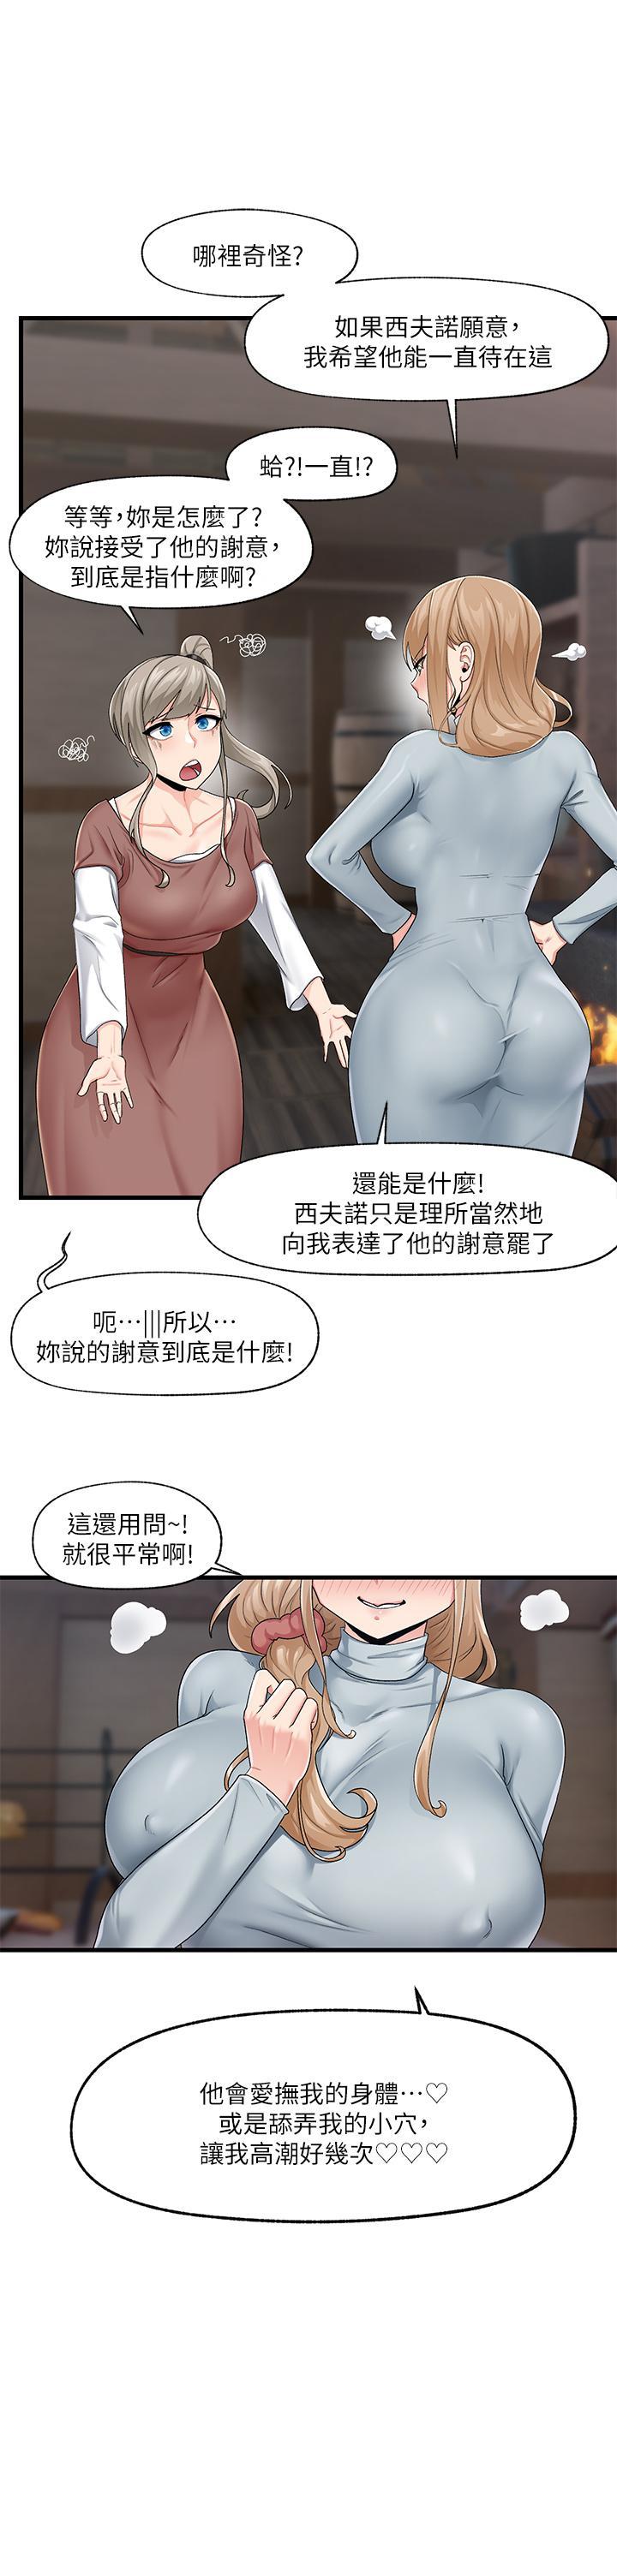 18yo King of hypnotist in Isekai (21-30)-chinese Mexicano - Page 8